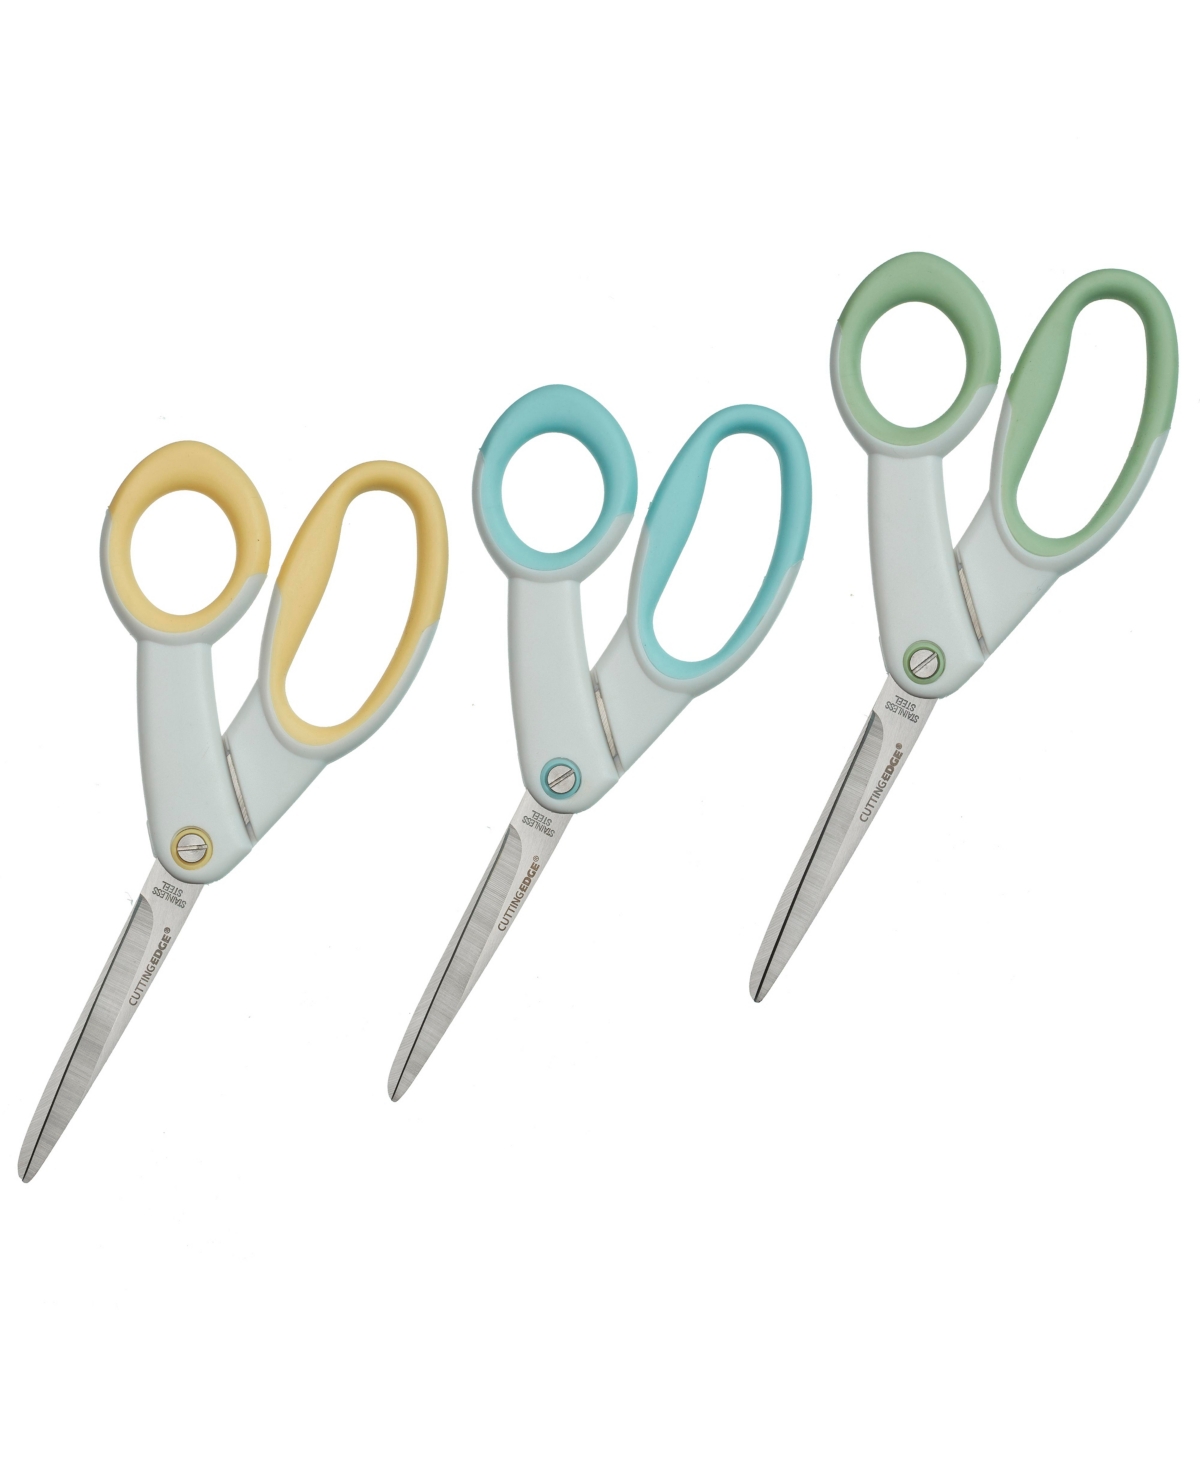 Ultra-Grip 8.5" Stainless Steel Scissors with Soft Comfort Grip, Office Supplies, Assorted, 36-Pack - Assorted